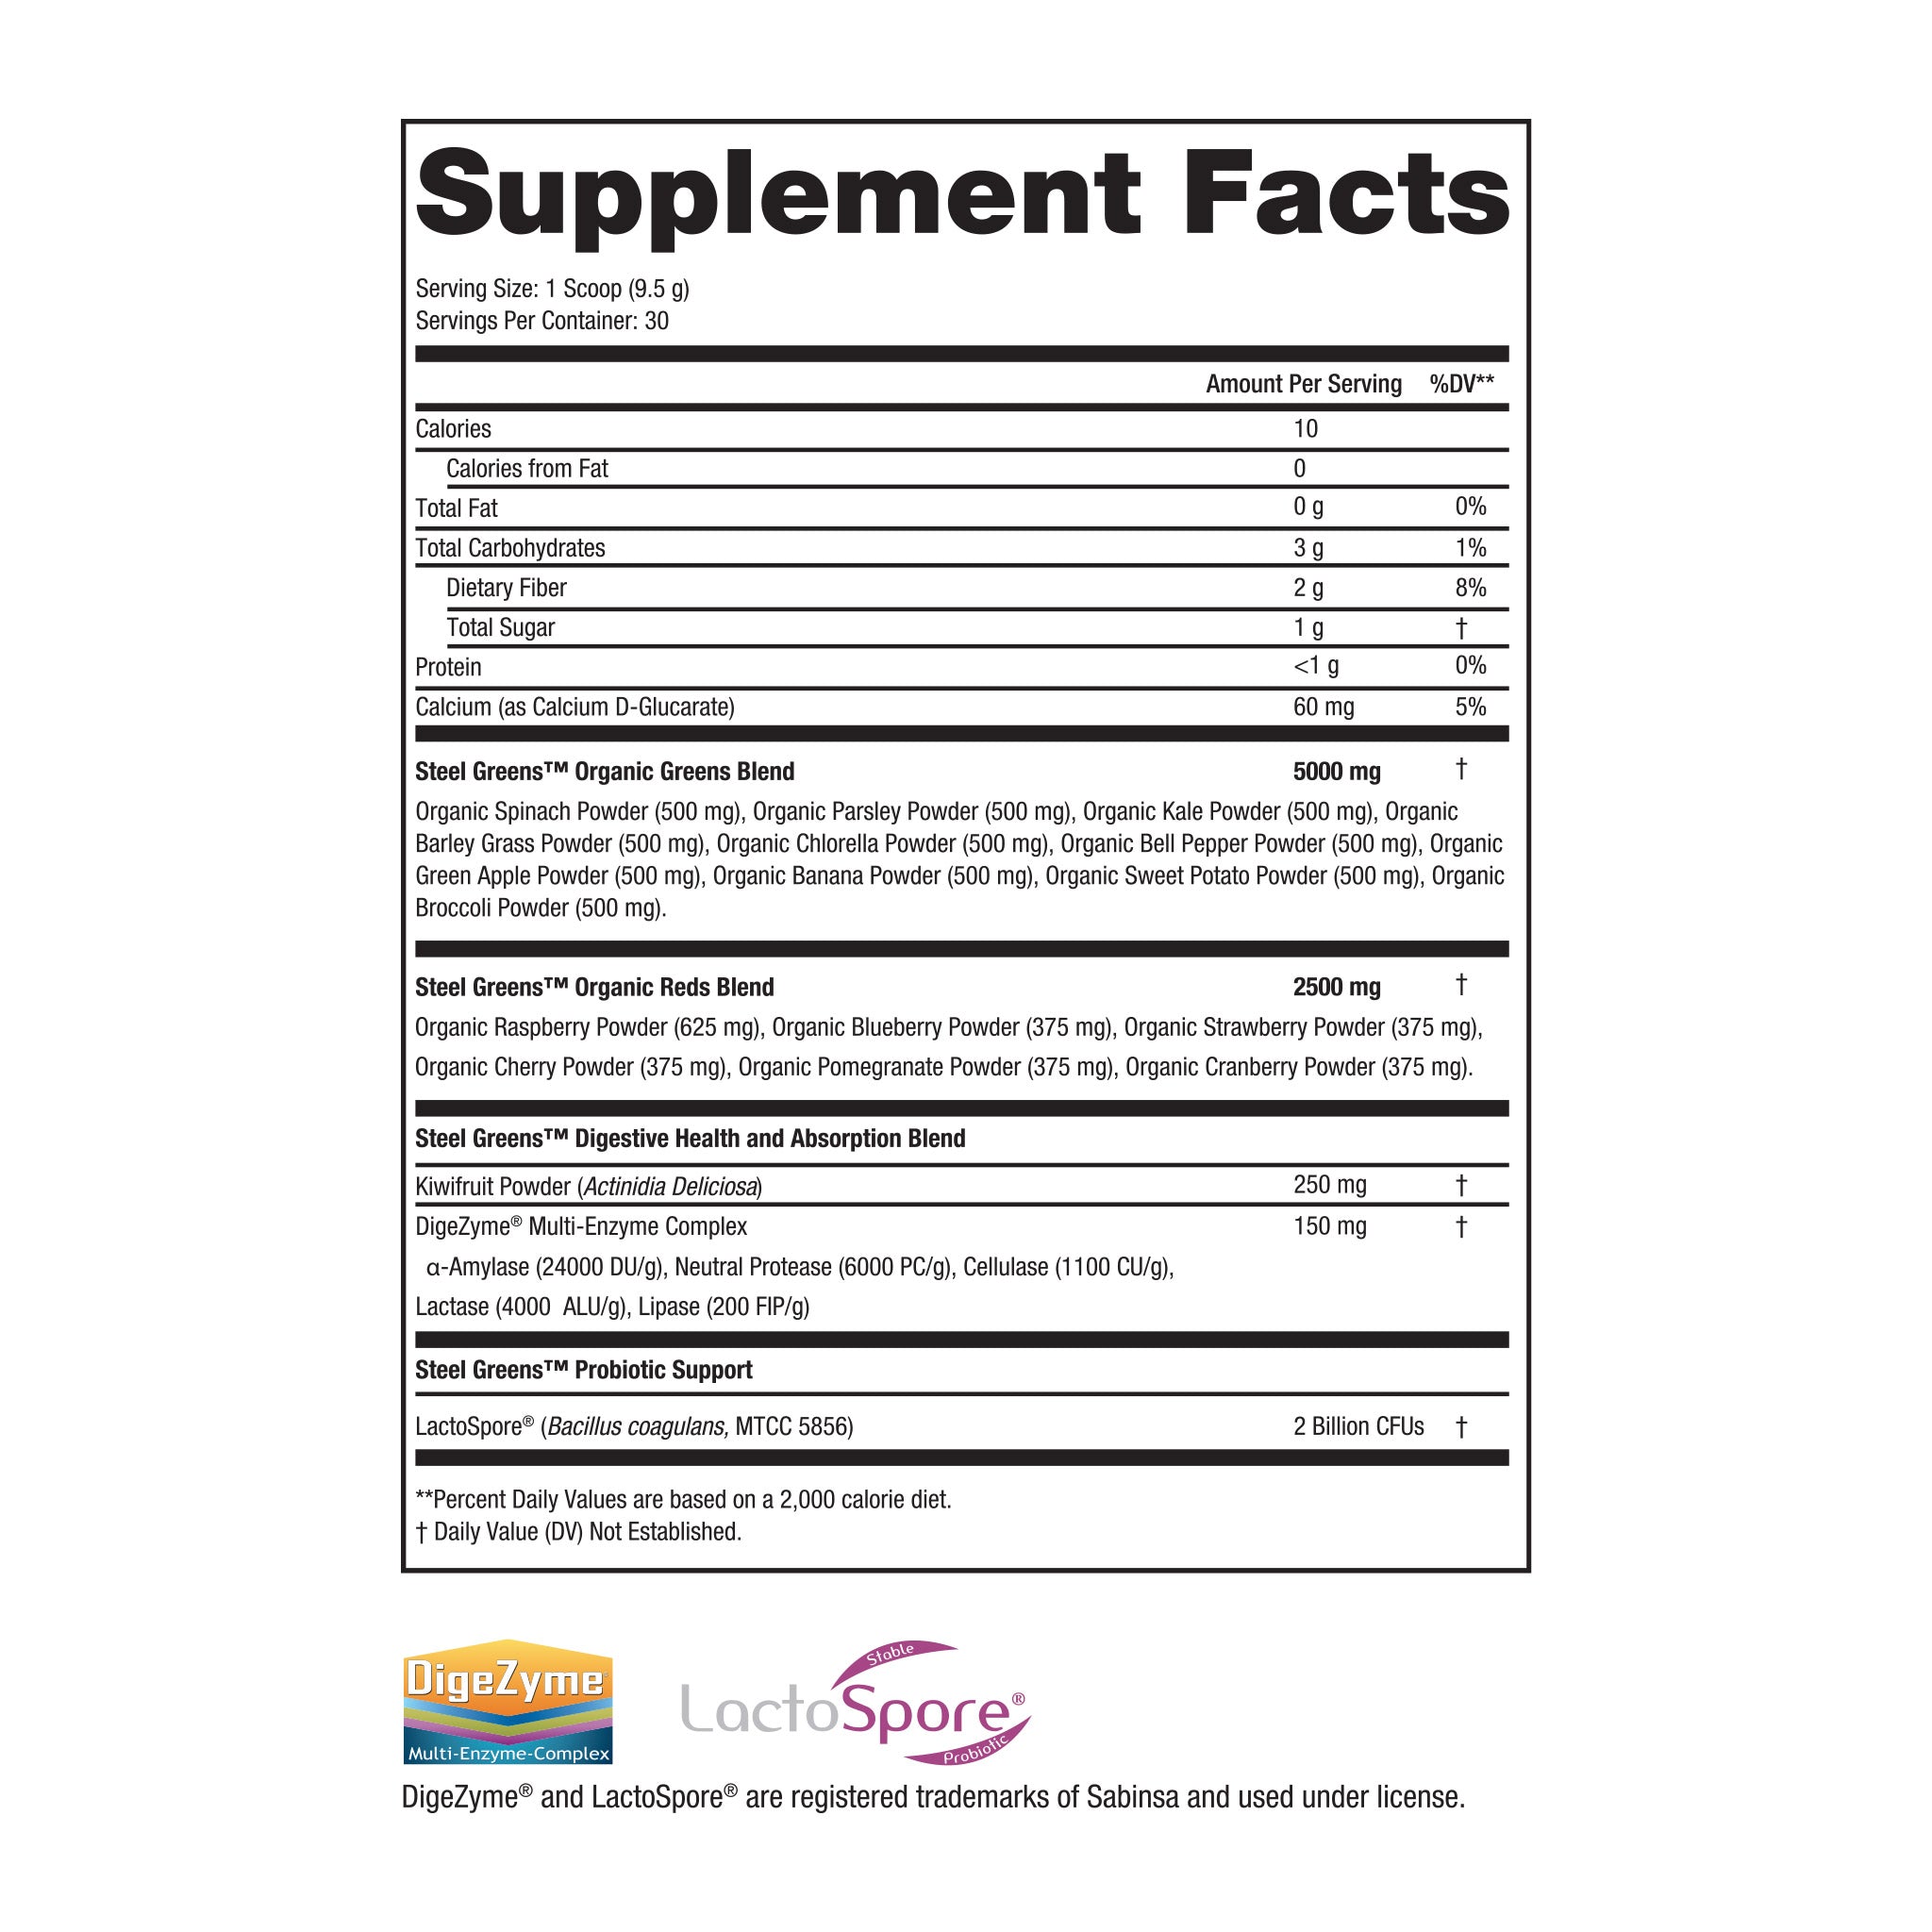 steel greens superfood supplement facts